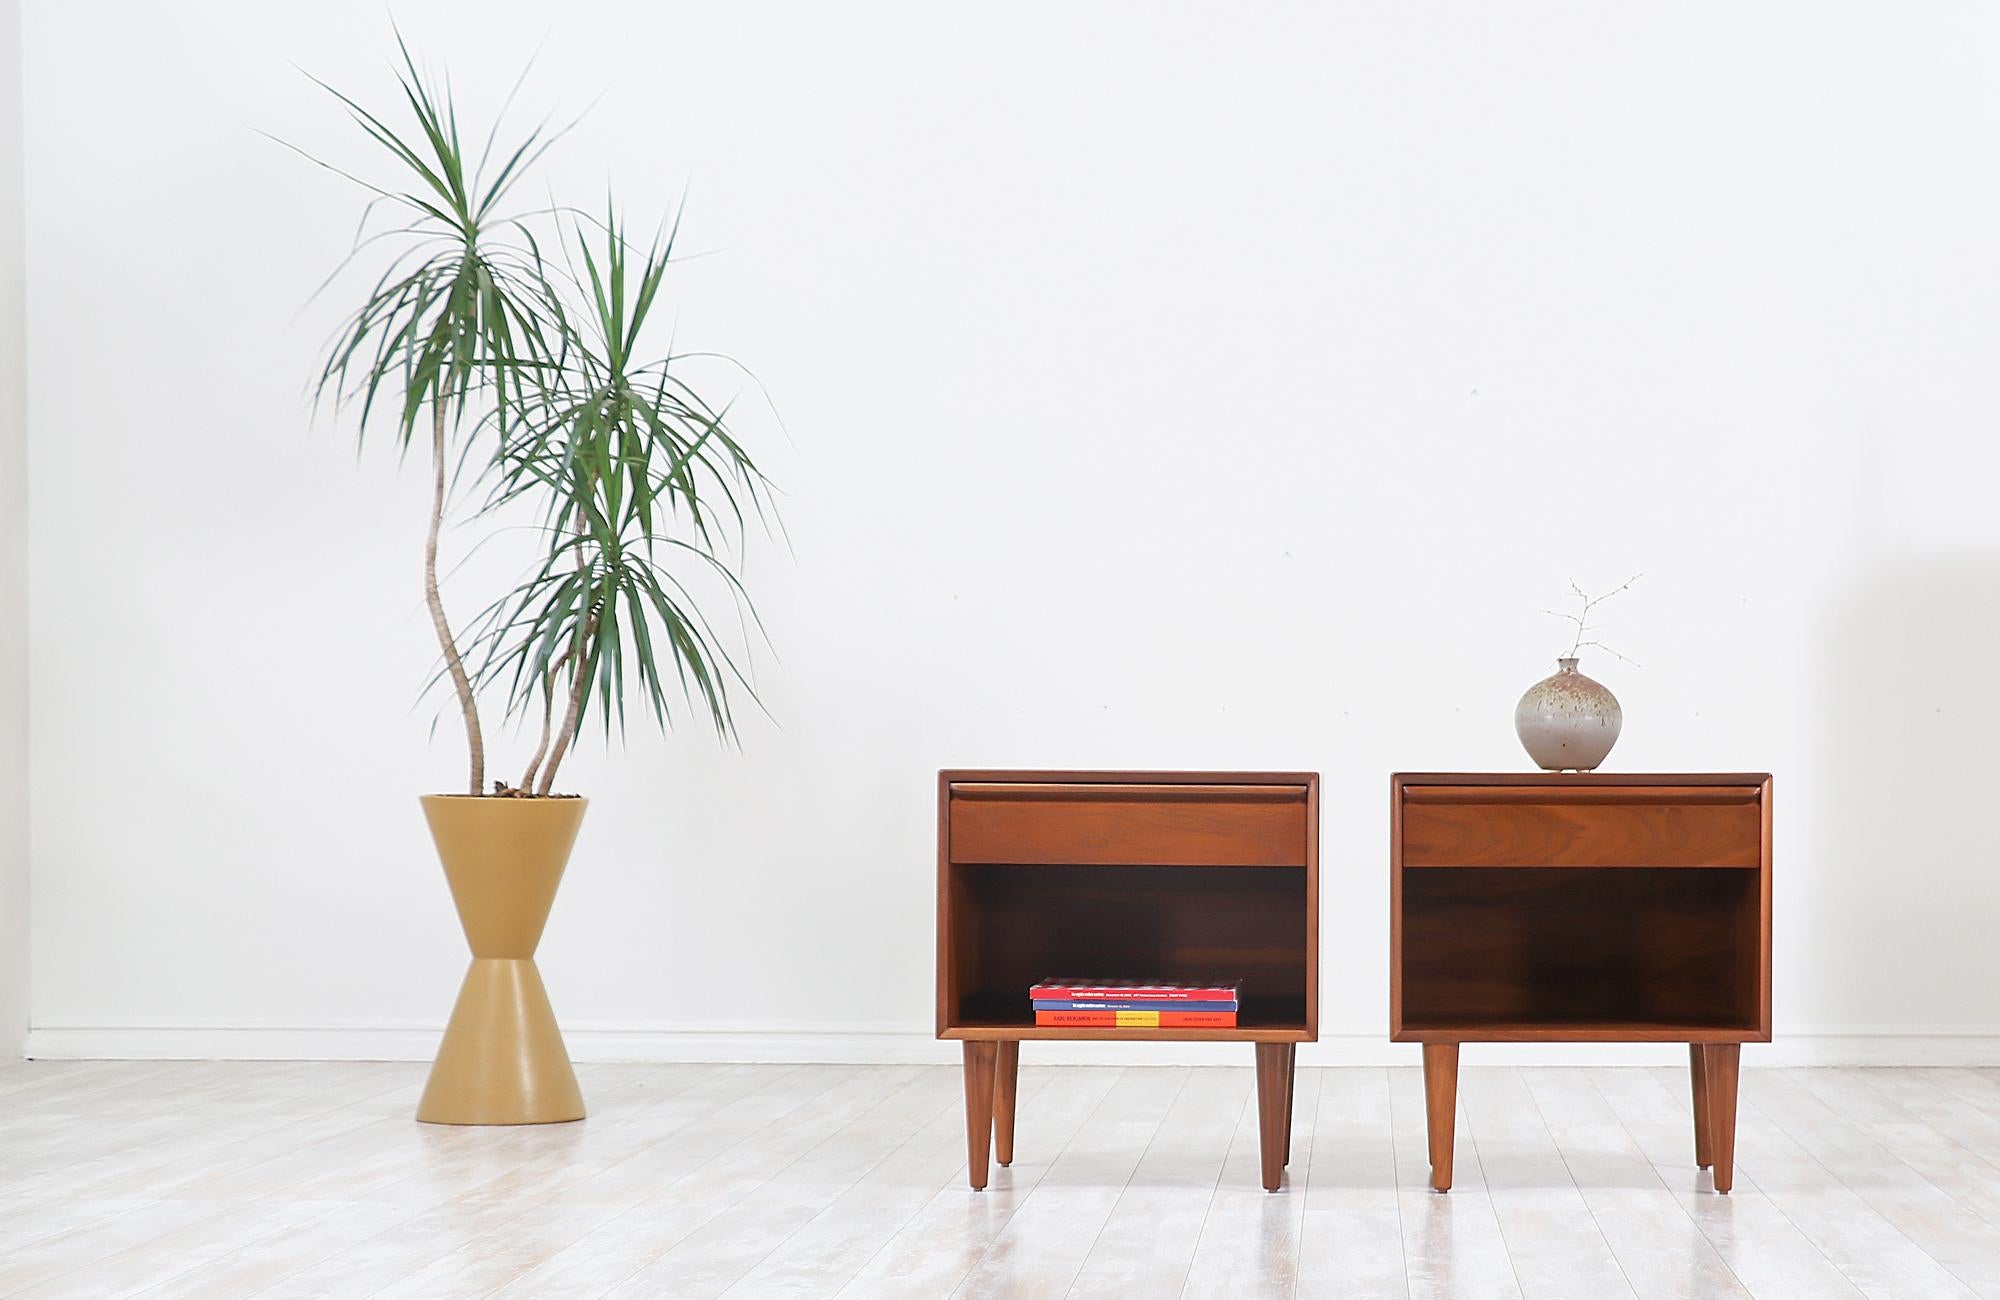 Pair of Scandinavian Modern nightstands designed and manufactured by Westnofa furniture in Norway, circa 1960s. This beautiful set of nightstands features a sturdy walnut wood case with four Classic taper legs for a clean and Minimalist aesthetic.